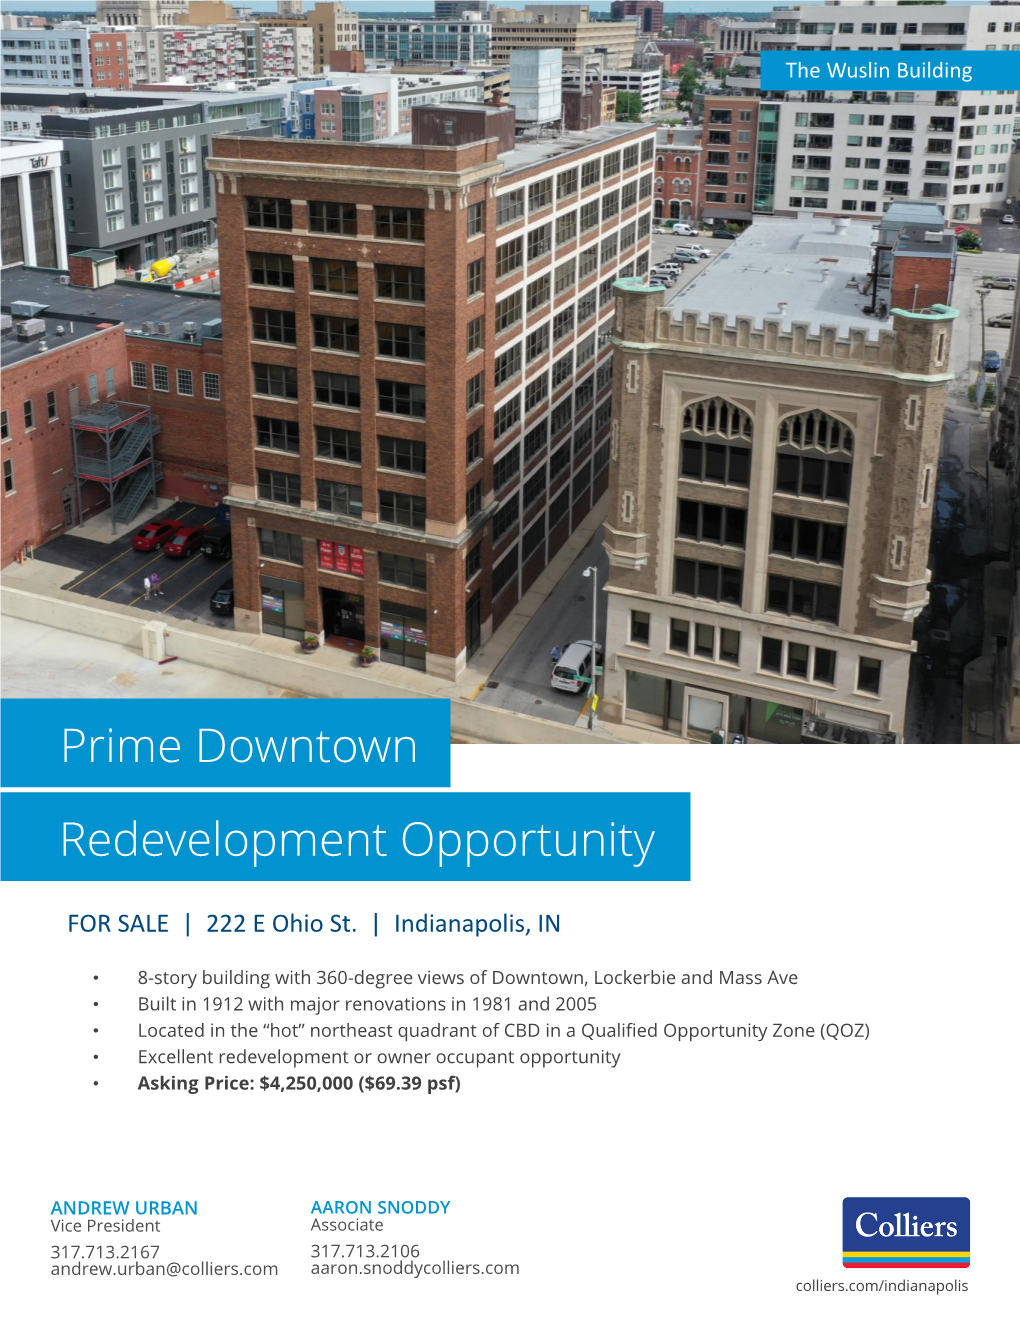 Prime Downtown Redevelopment Opportunity